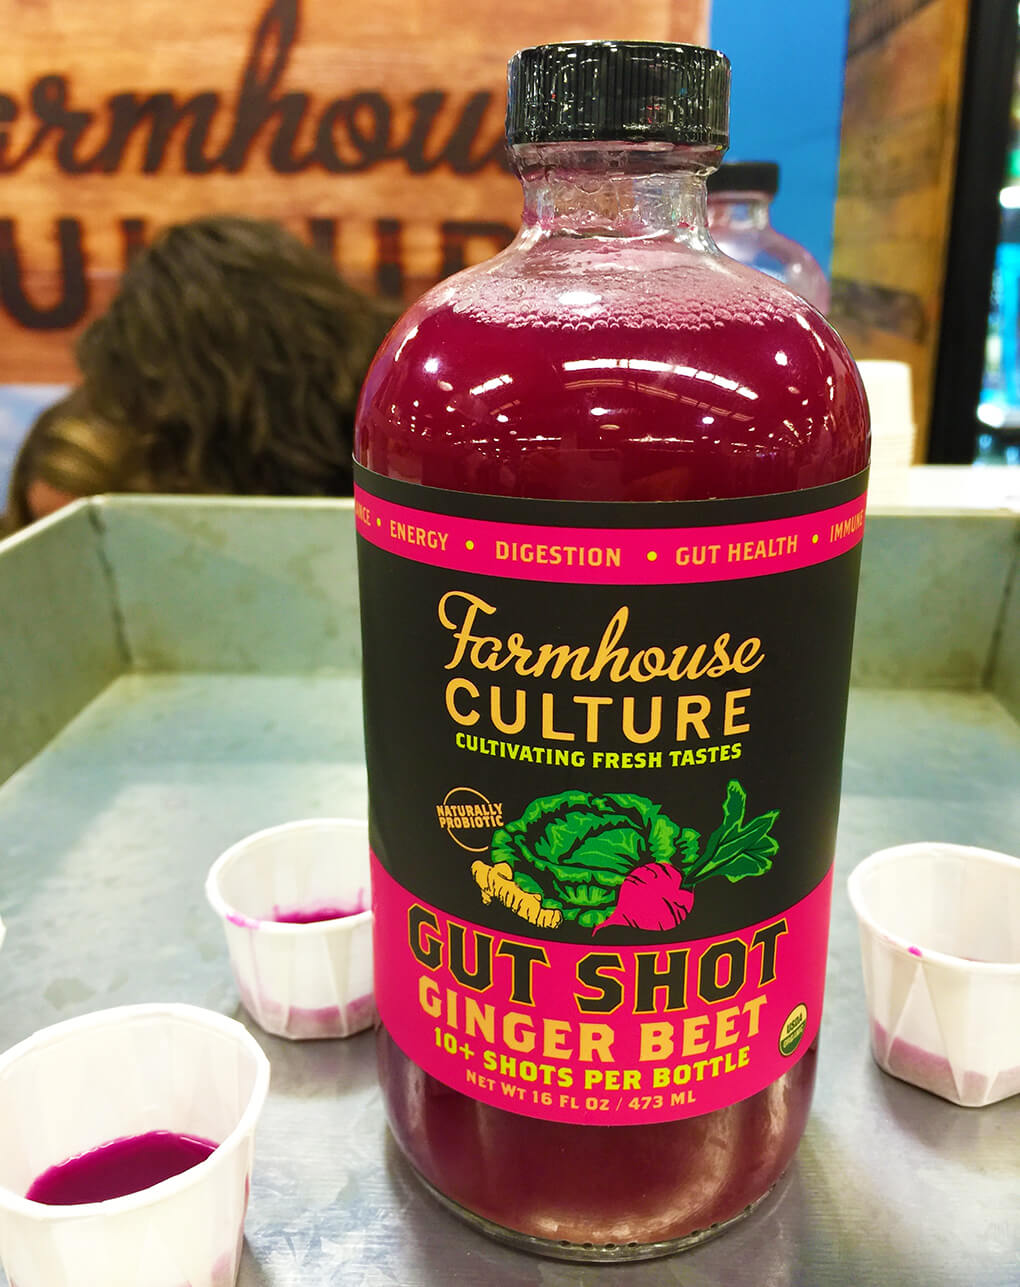 2016 Natural Products Expo West Favorite Brands and Products Farmhouse Culture Gut Shot sarahkayhoffman.com